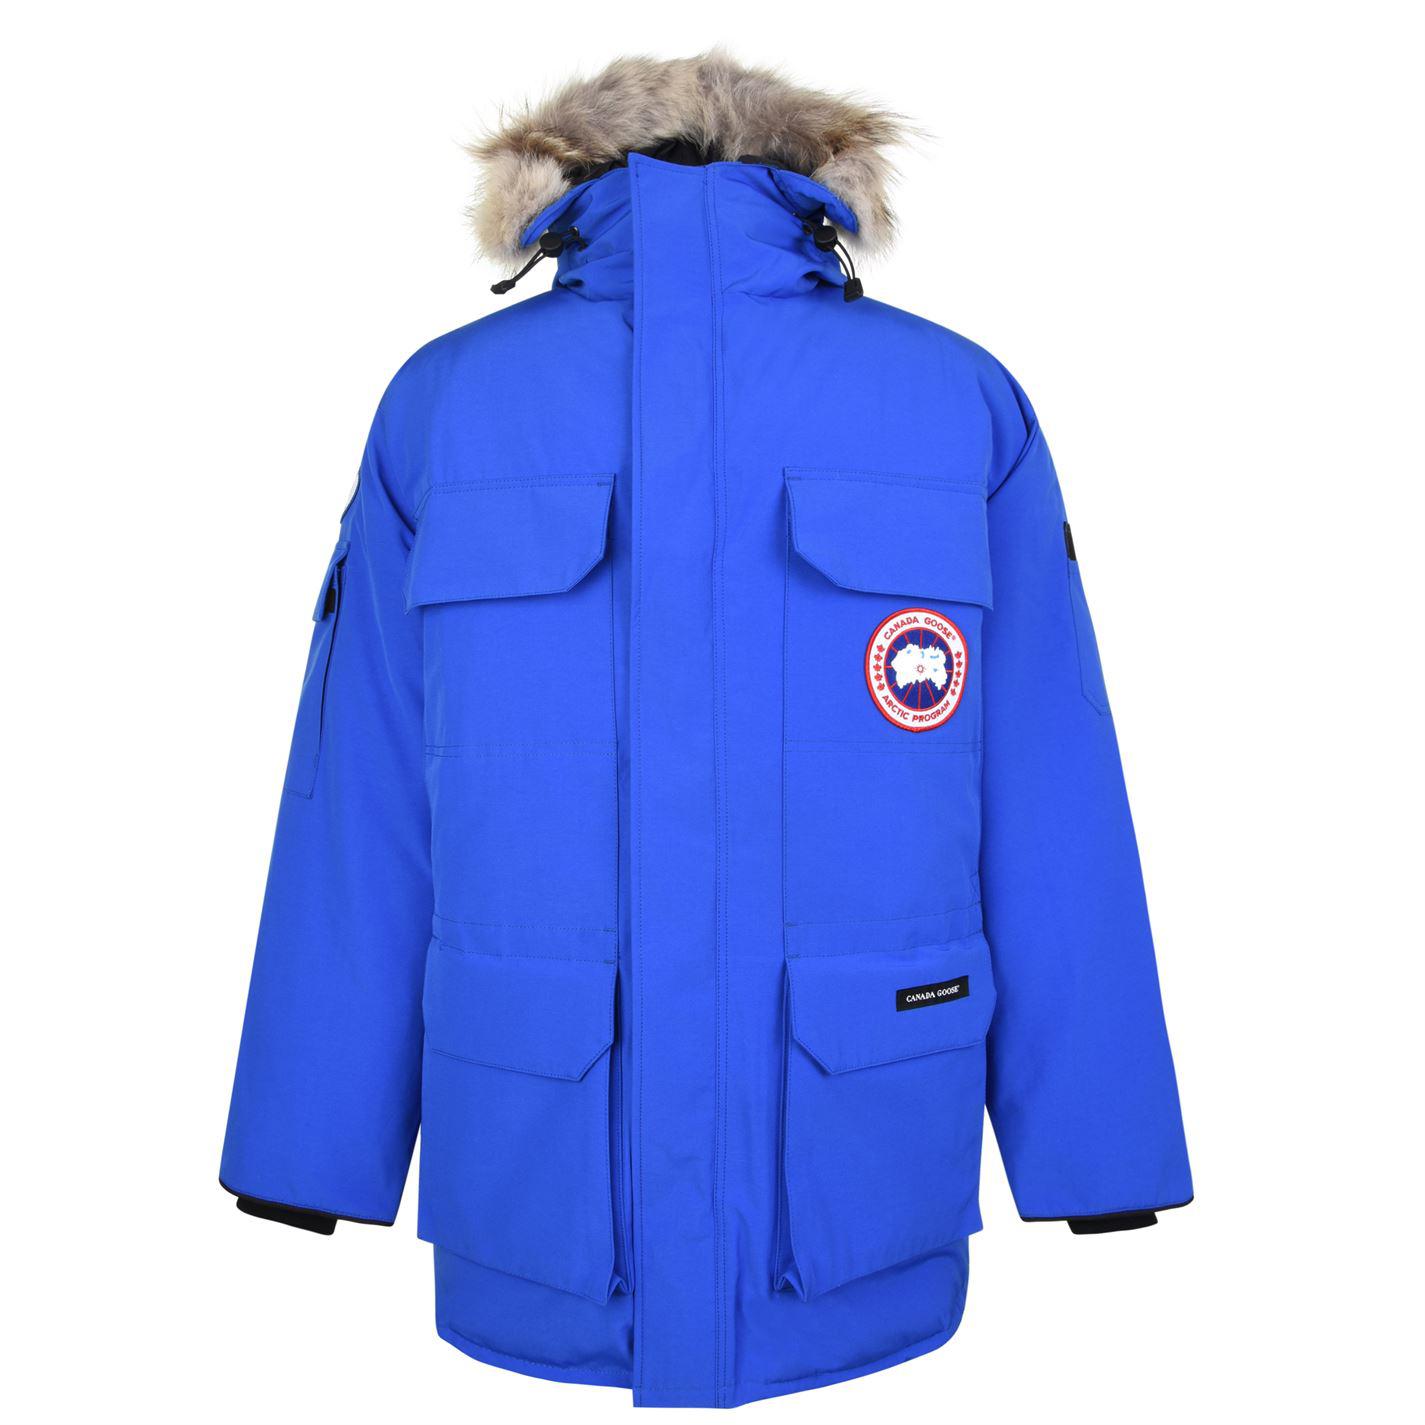 Canada Goose Expedition Parka Jacket in Blue for Men - Lyst